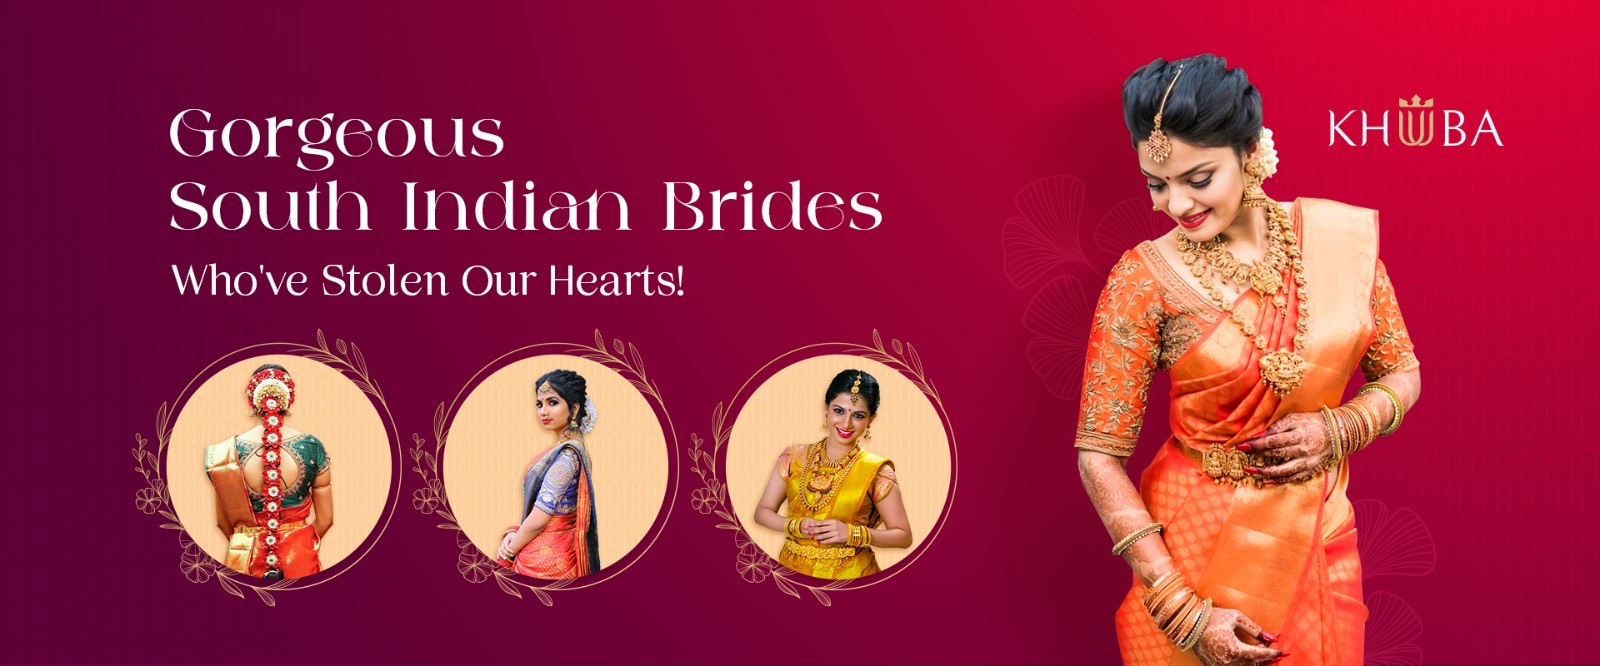 Kanjeevaram Saree Inspiration for South Indian Brides - Get Inspiring Ideas  for Planning Your Perfect Wedding at fabweddings